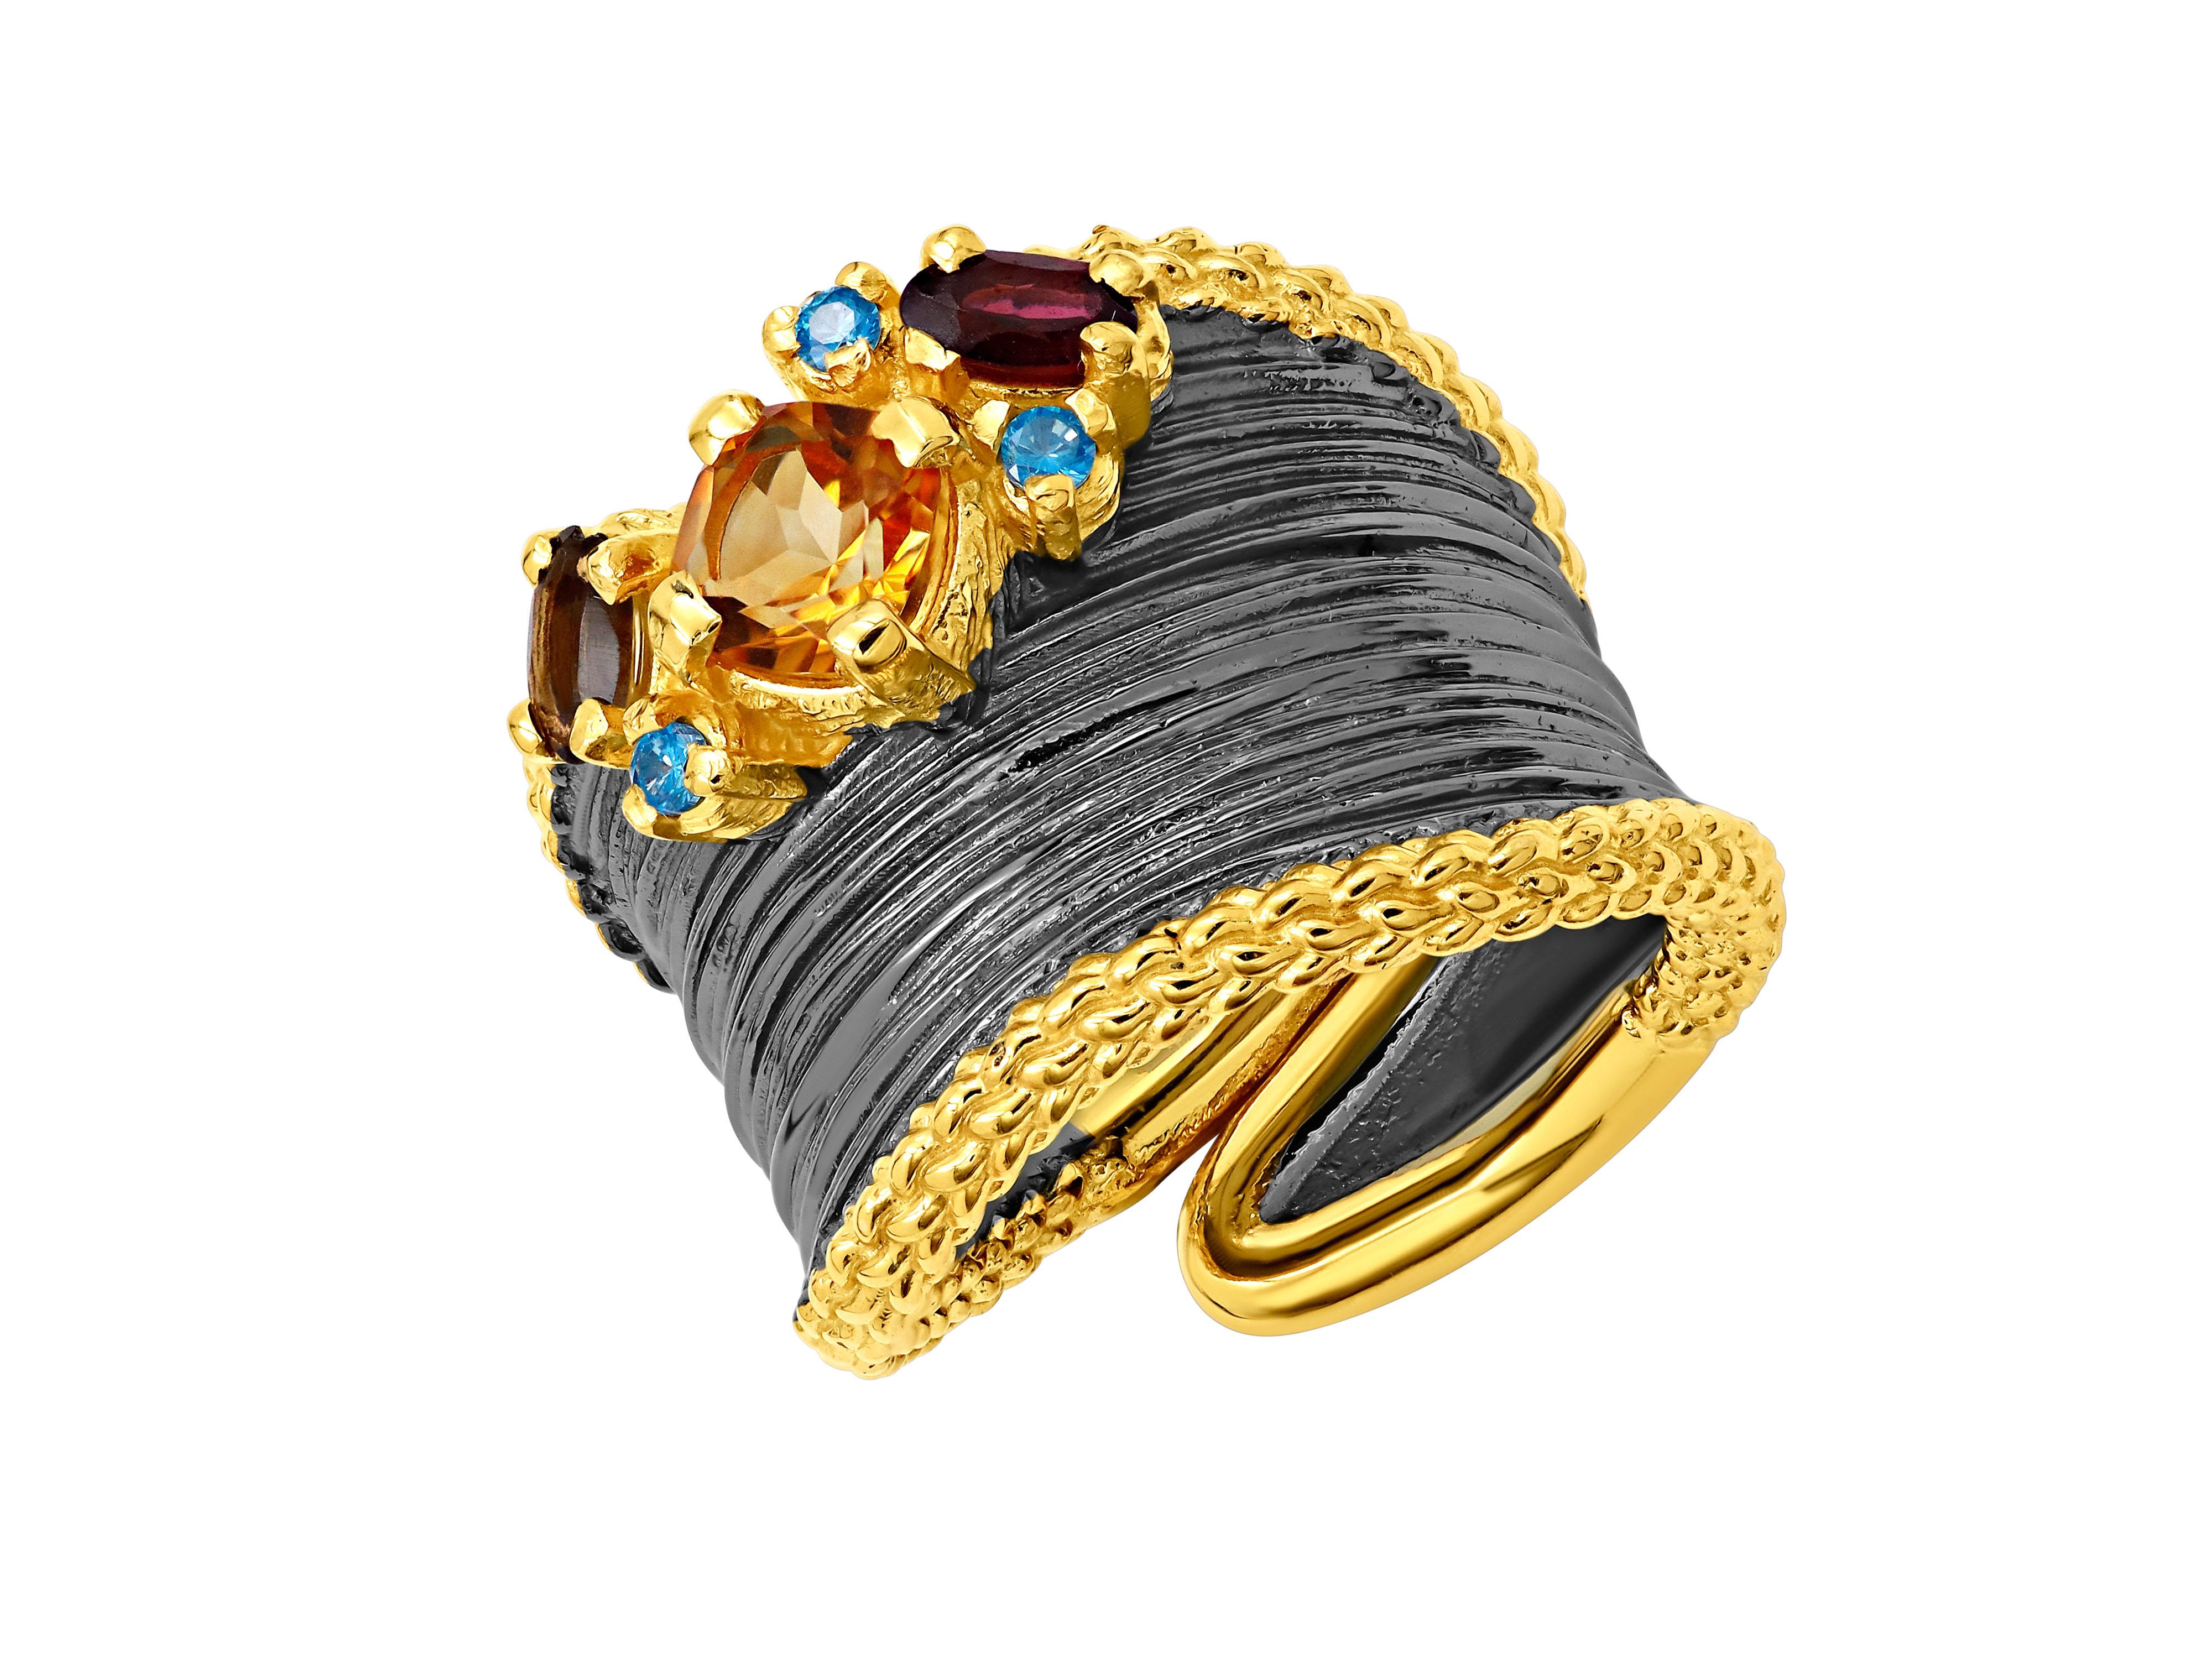 A wide silver ring adorned with vibrant gemstones: citrine, smoke, garnet, and blue topaz.
This stunning ring features a blackened, wide band crafted from sterling silver, elegantly wrapping around your finger. The band is slightly asymmetrical,